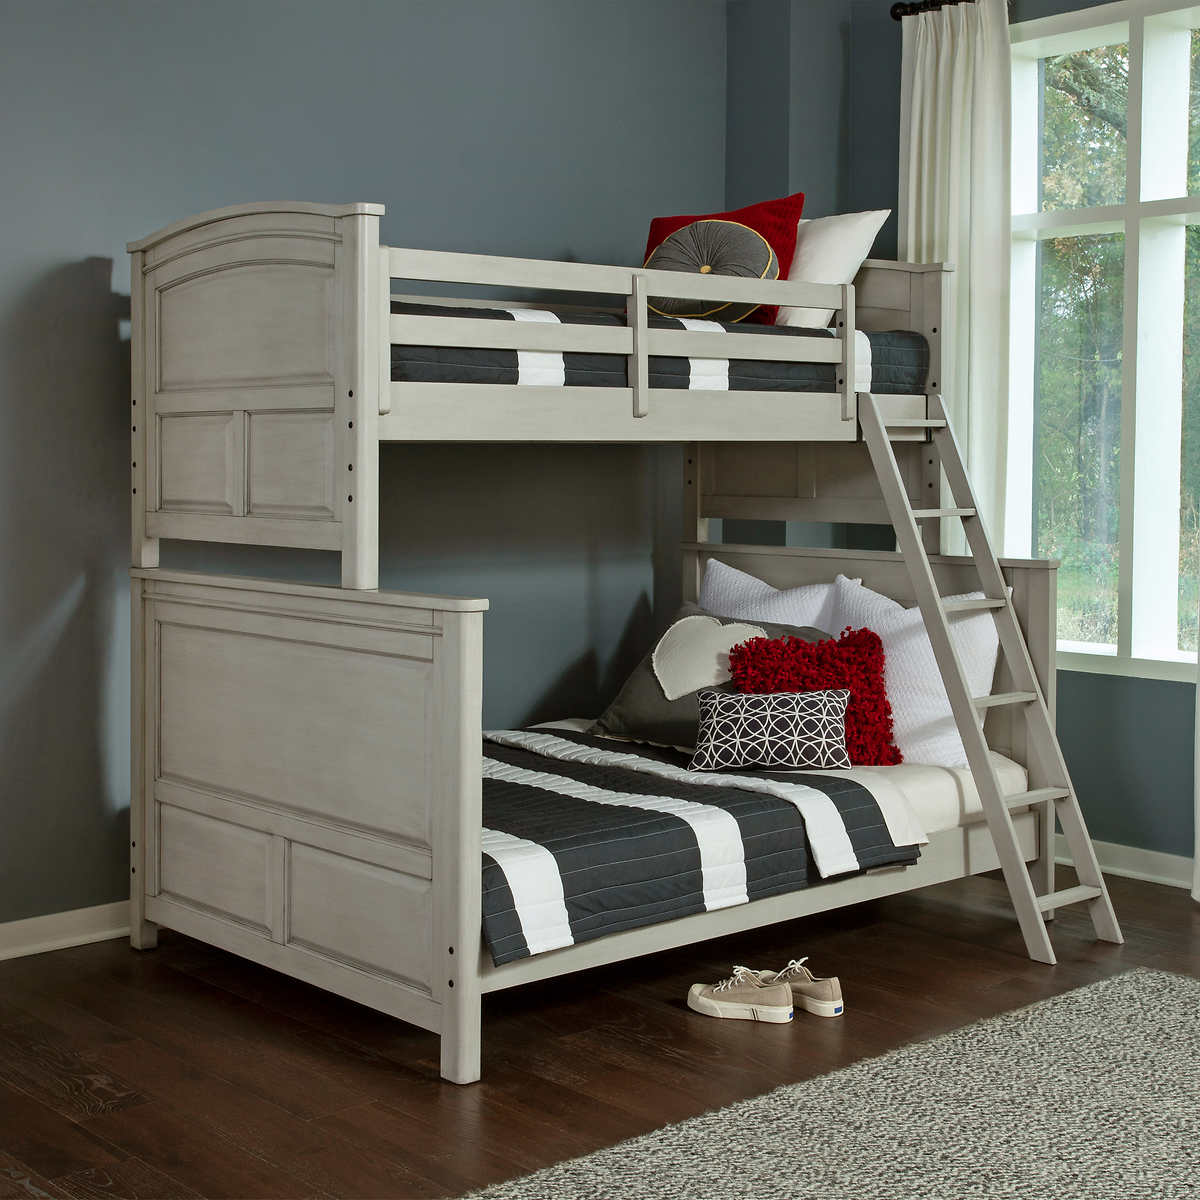 Wingate Twin Over Full Bunk Bed Costco, Bunk Bed Replacement Pins